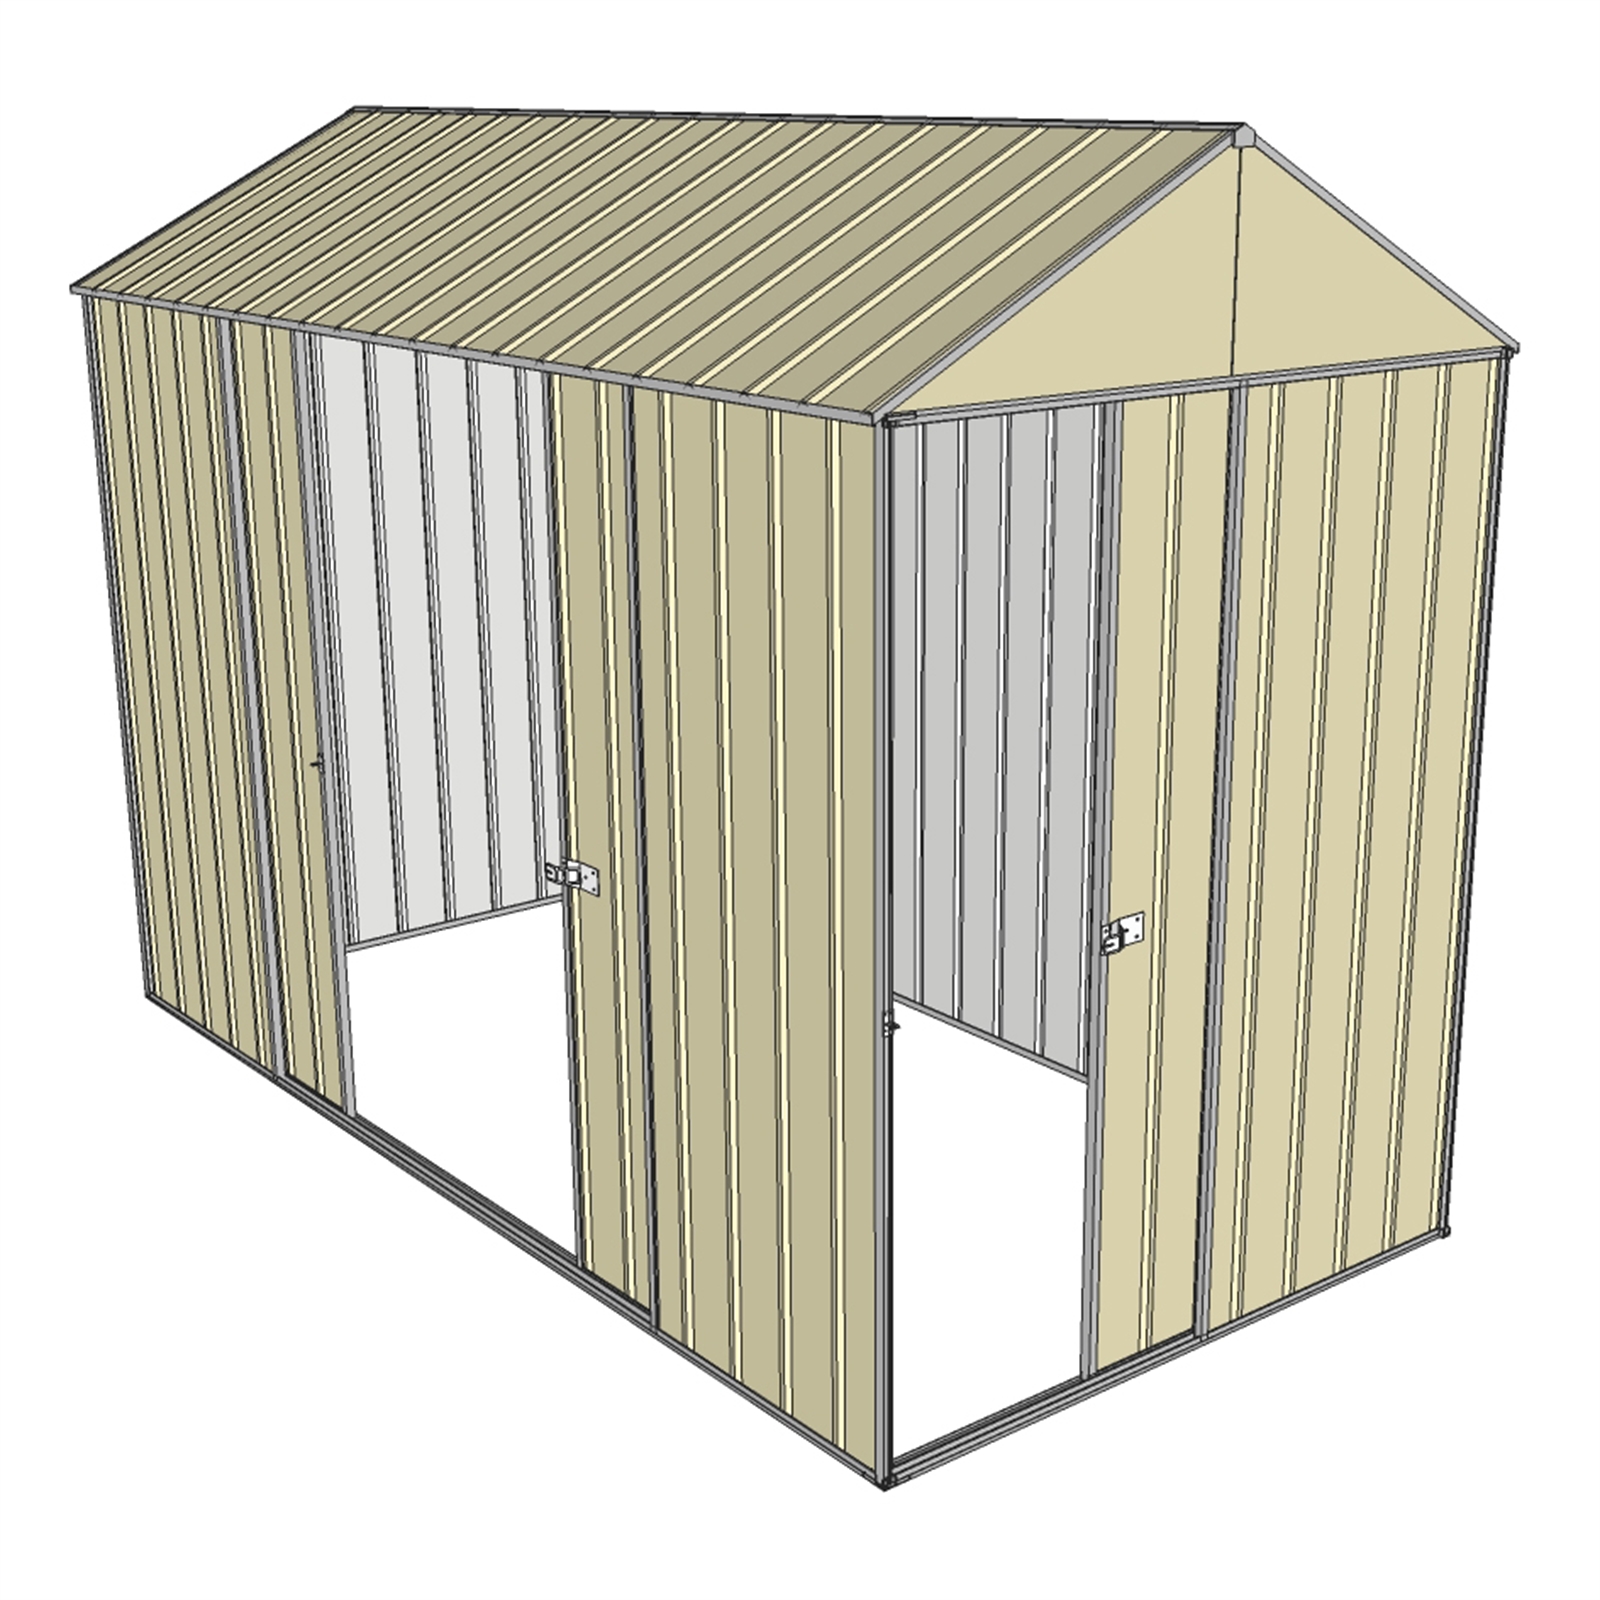 Build-a-Shed 1.5 x 2.3 x 3.0m Cream Front Gable Single Sliding And Double Sliding Doors Shed